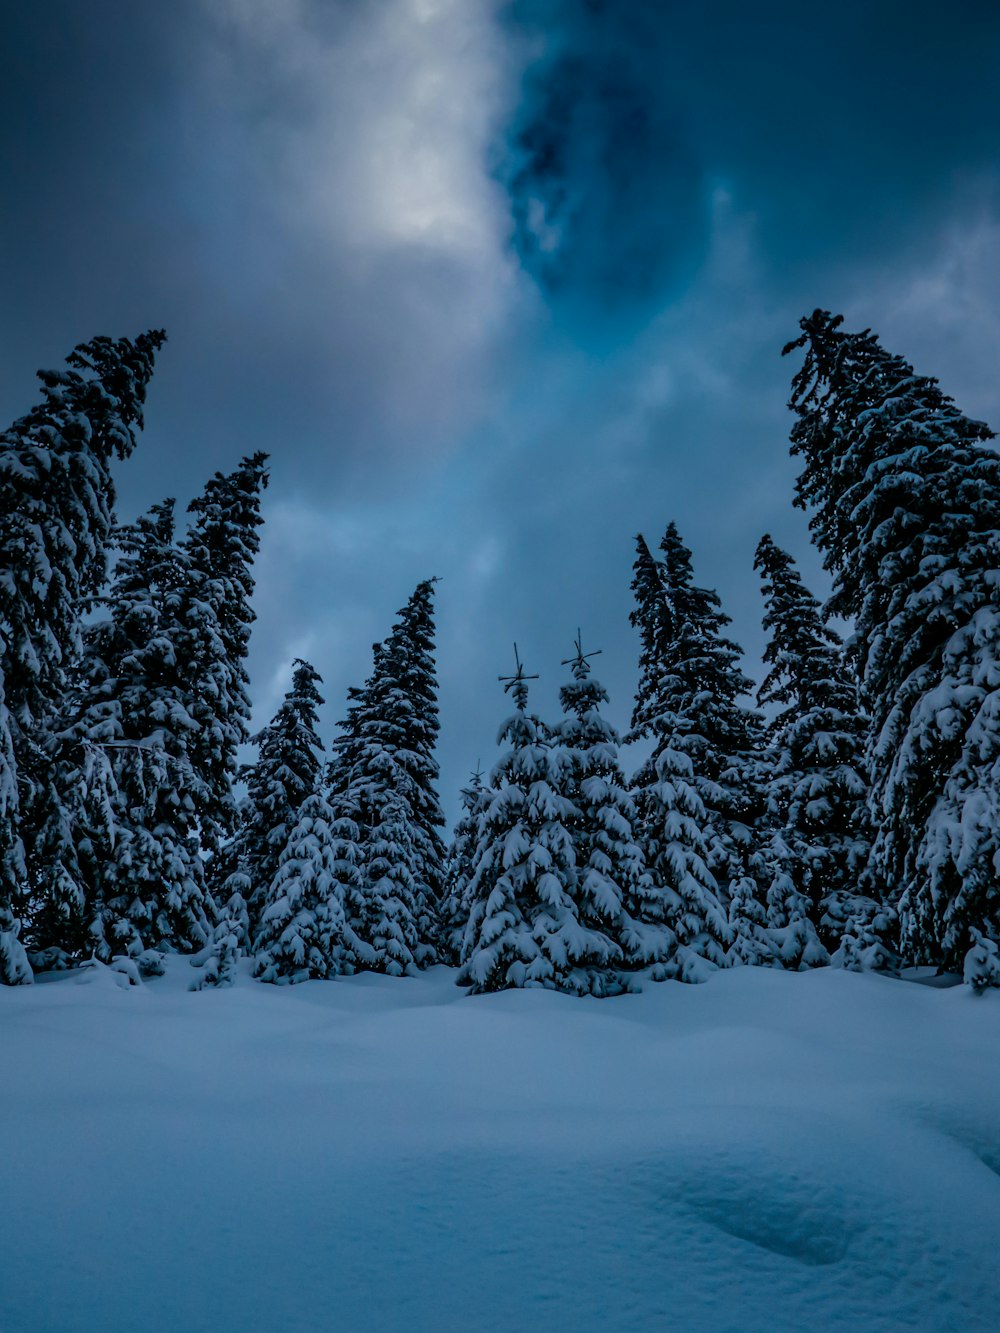 a group of trees covered in snow under a cloudy sky